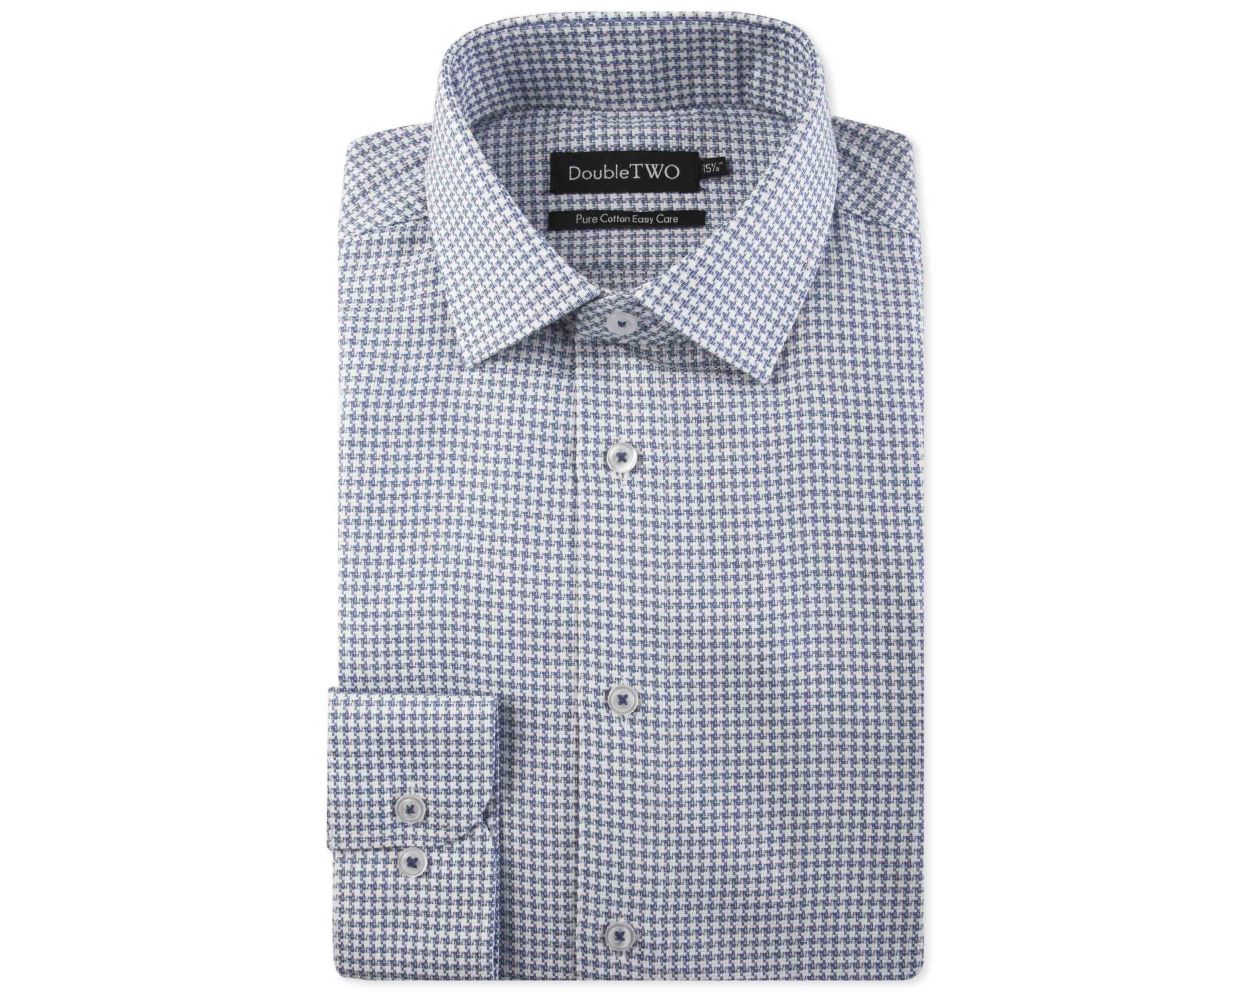 Men's 100% Cotton Grey Dogtooth Formal Shirt | Double TWO